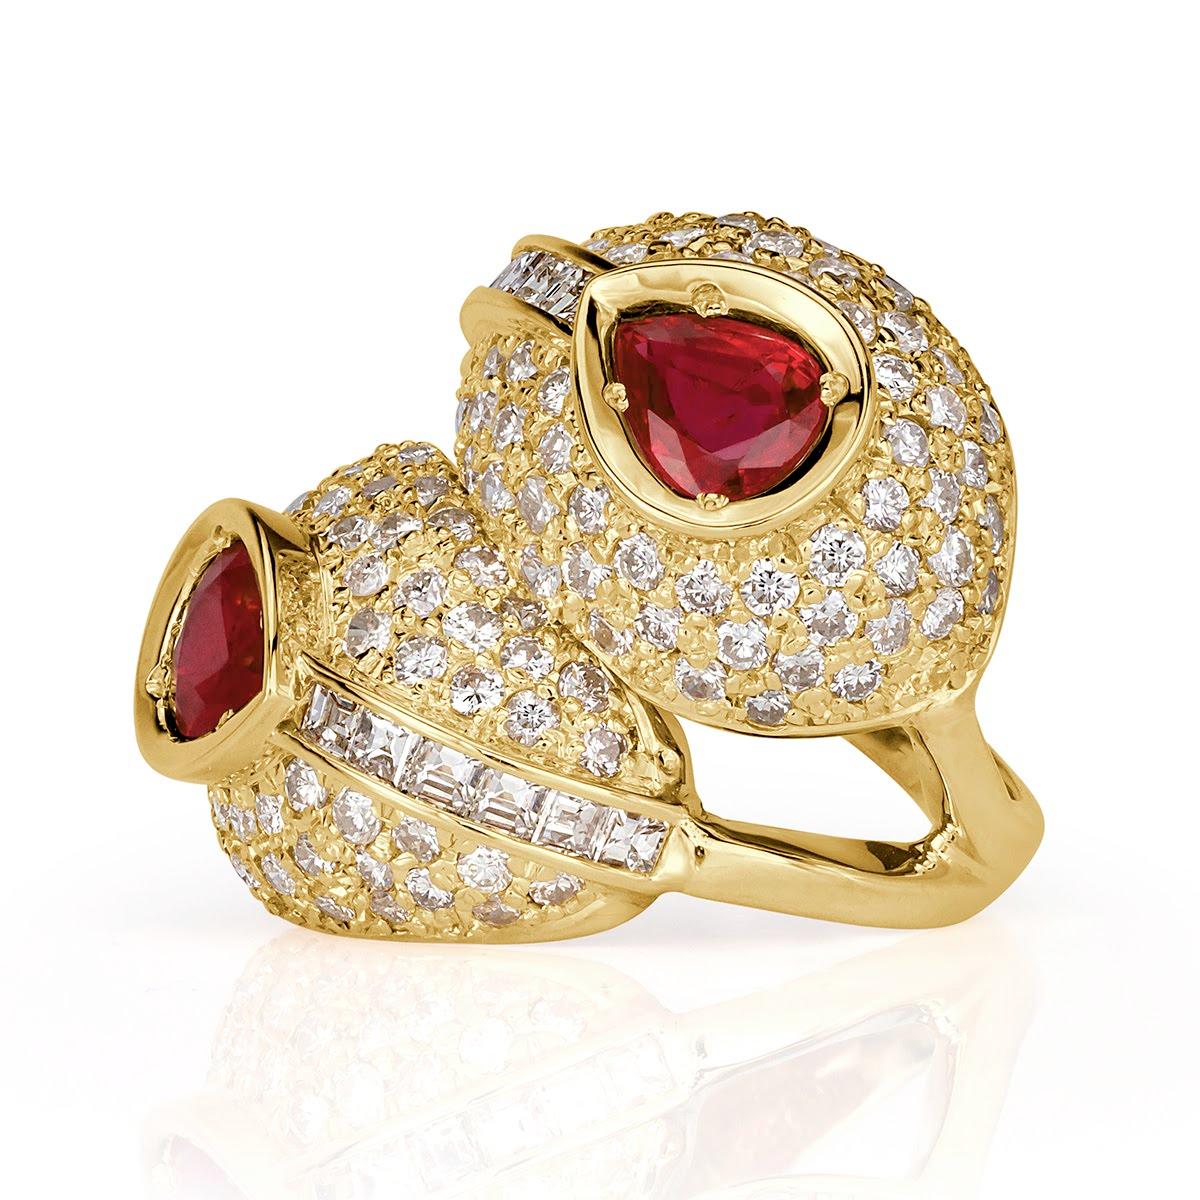 This ravishing vintage diamond and ruby ring features a stunning double leaf design studded with 2.30ct of round and Asscher cut diamonds. It is accented by 2.00ct of pear shaped rubis at the center. (Weights are approximate)
